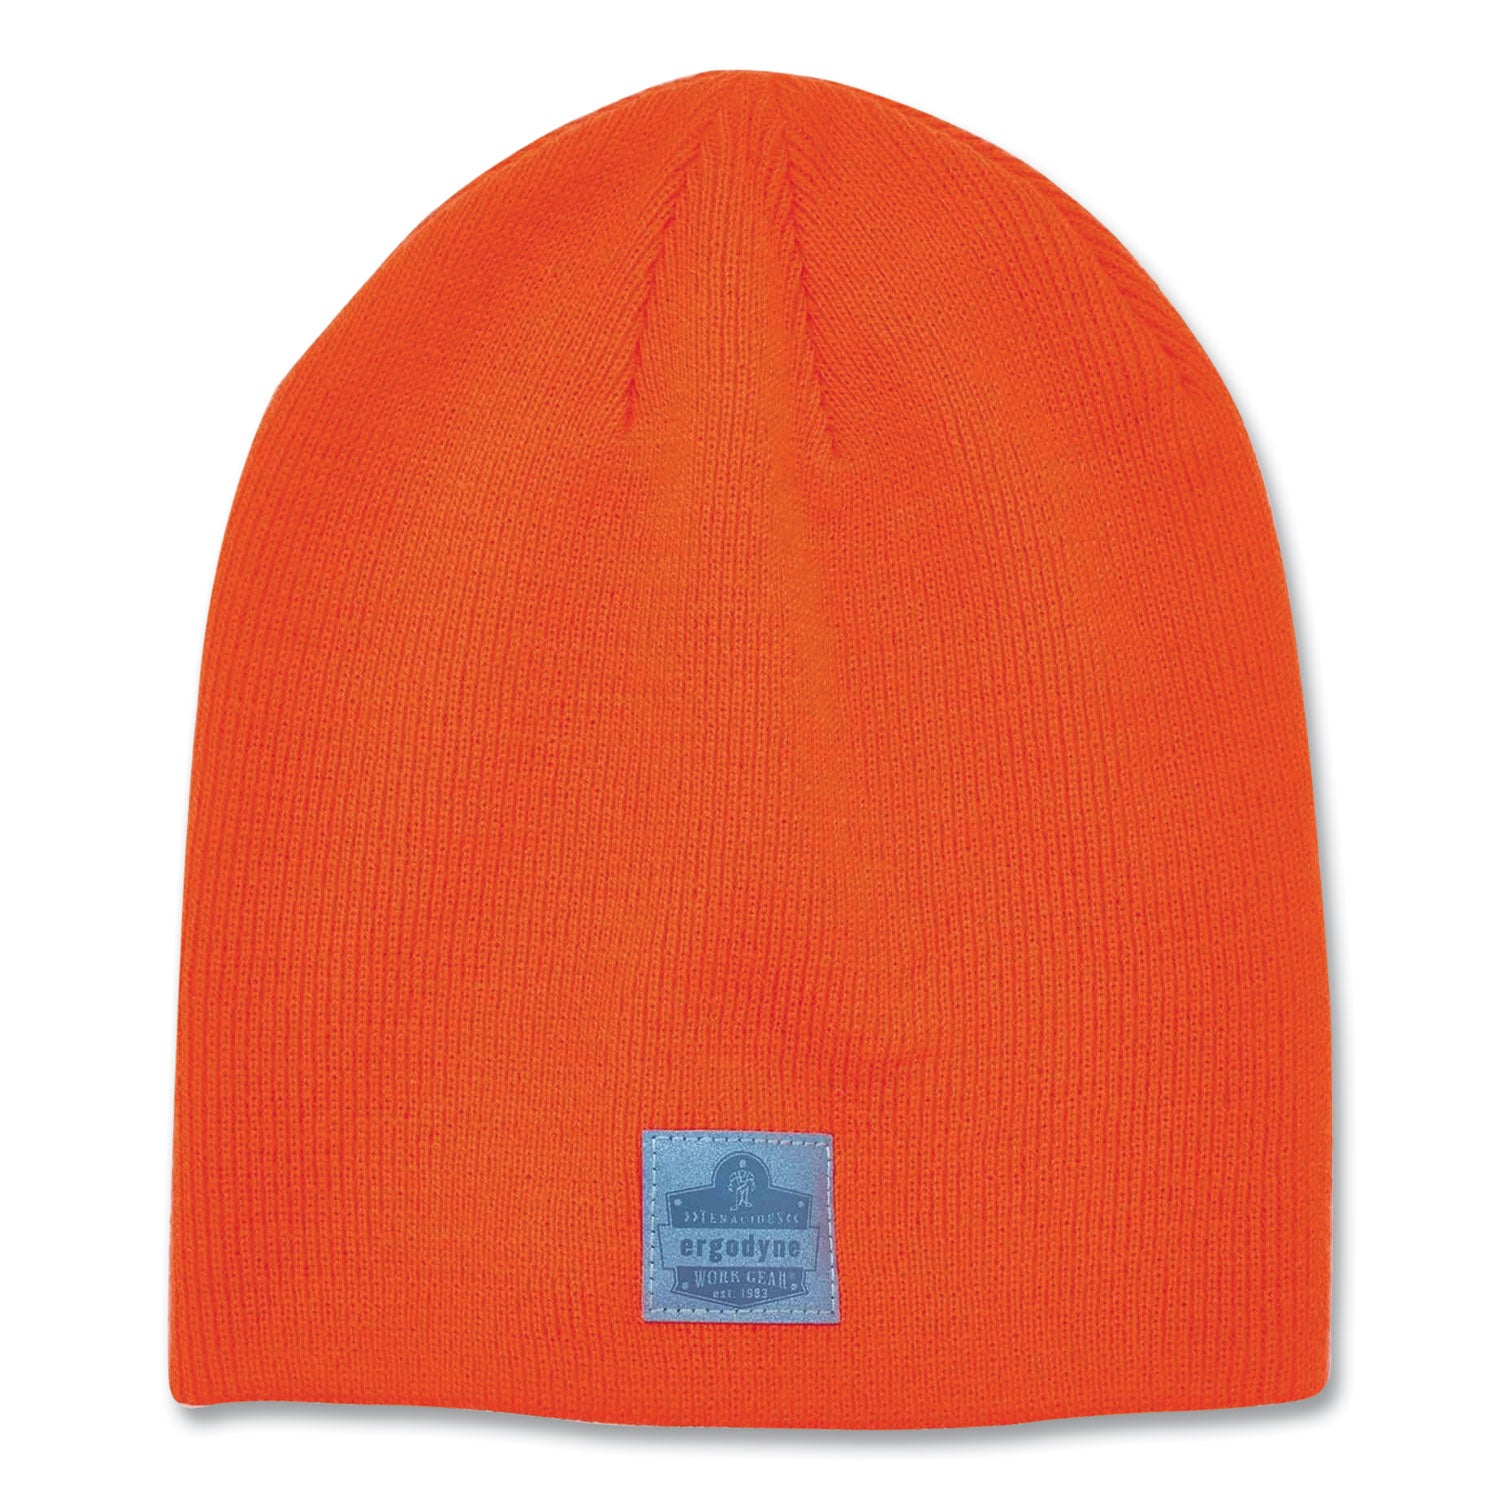 n-ferno-6812-rib-knit-beanie-one-size-fits-most-orange-ships-in-1-3-business-days_ego16814 - 1